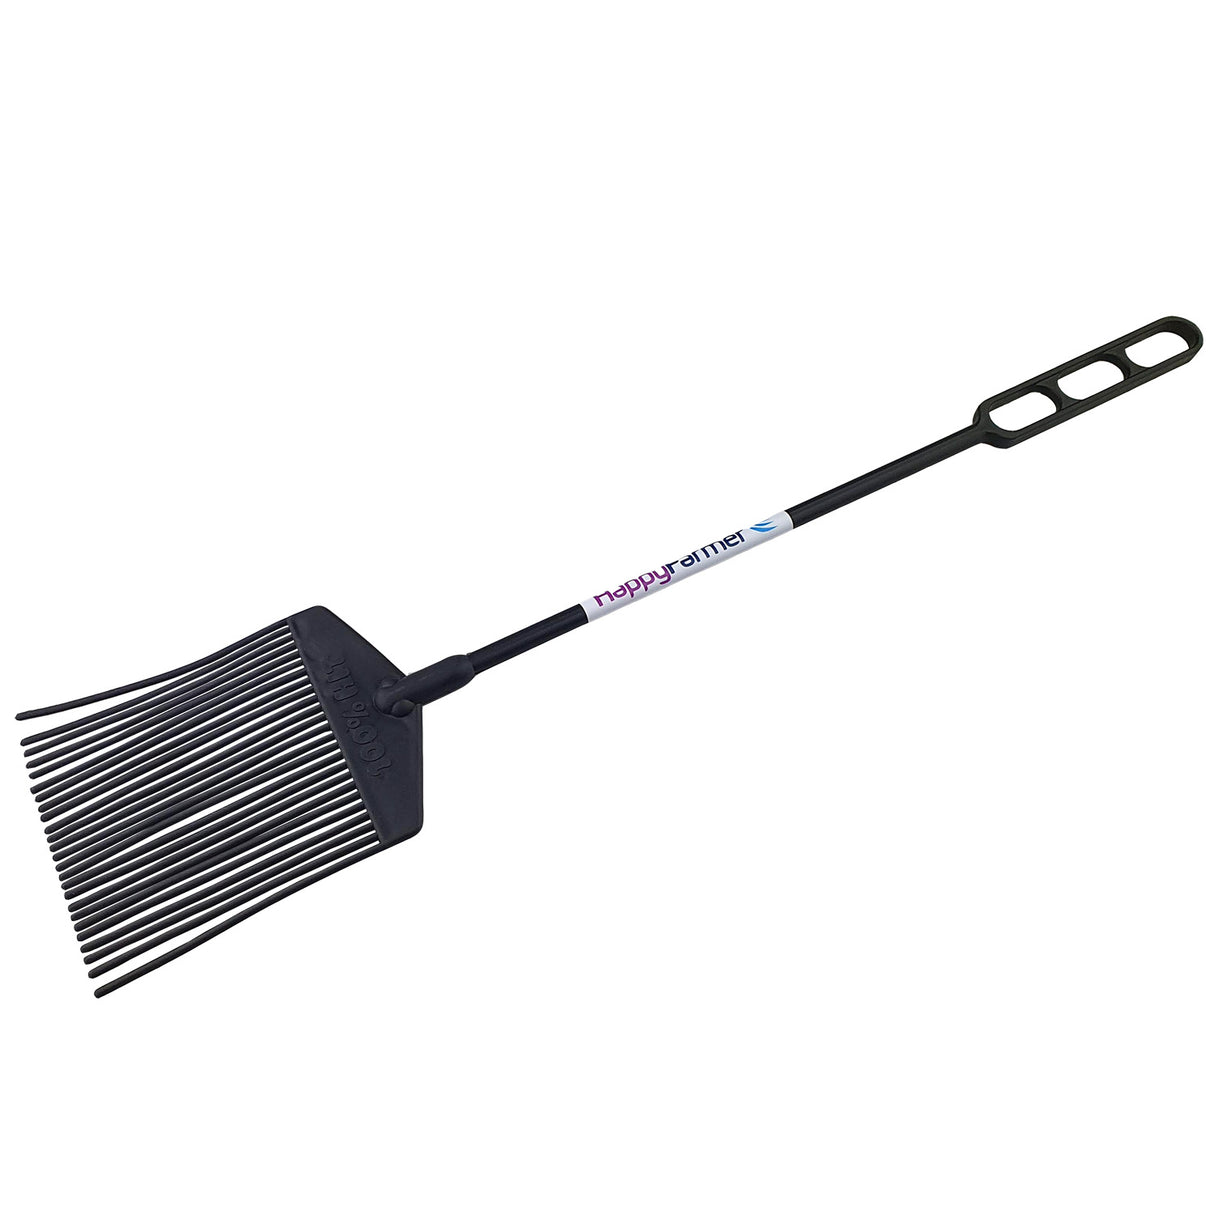 Cuil swatter 100% buailte